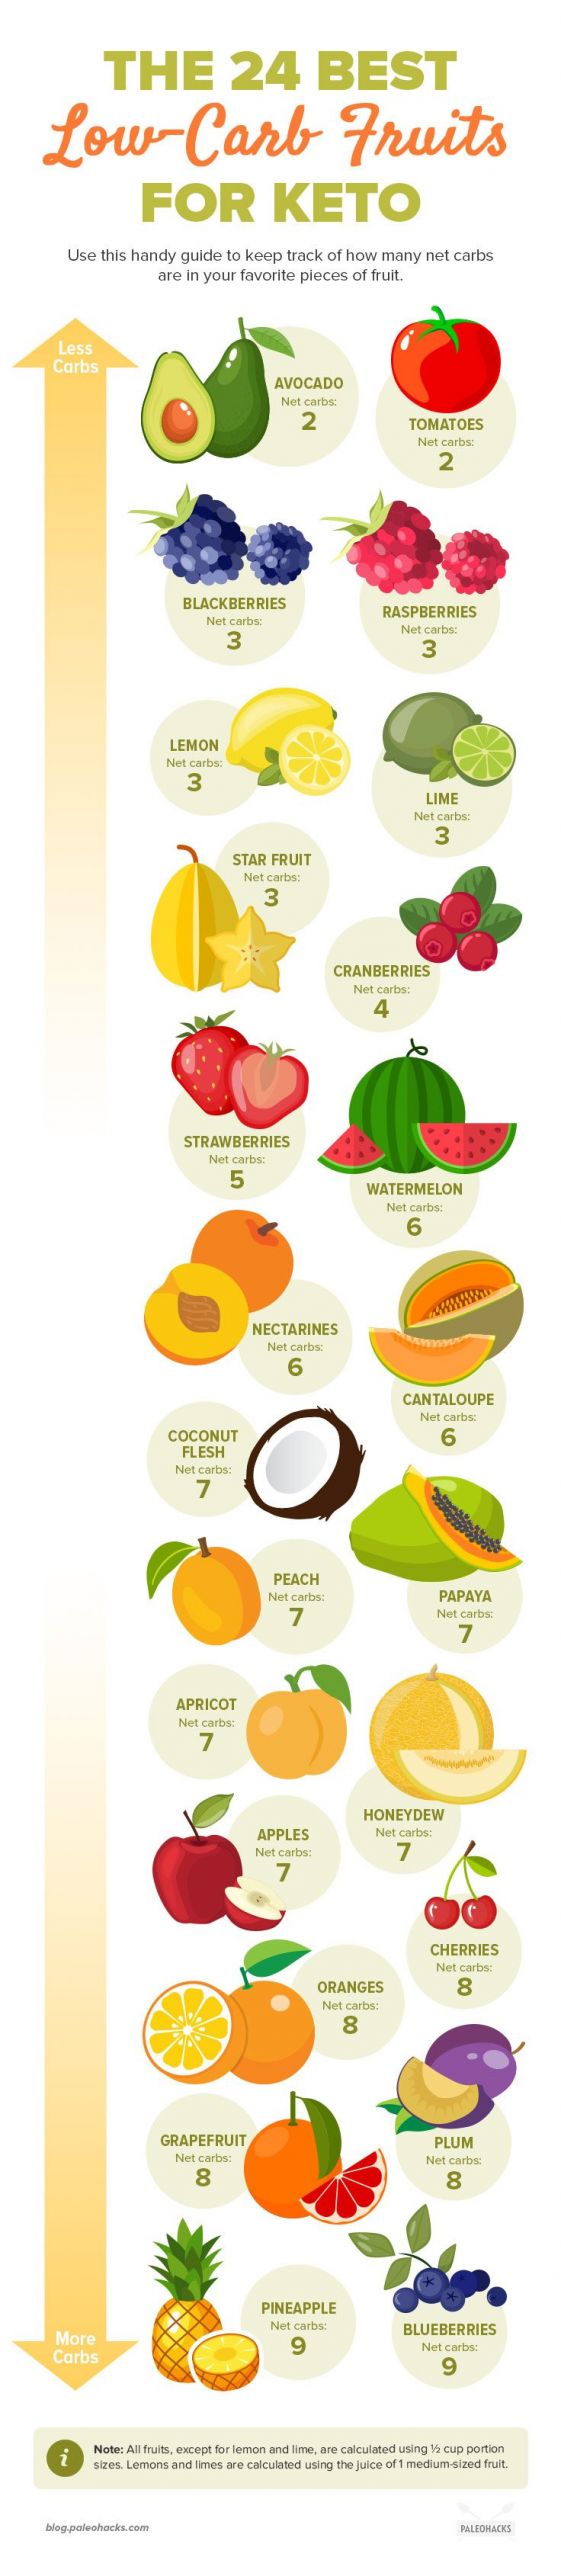 Keto Diet And Fruit
 The 24 Best Low Carb Fruits for Keto